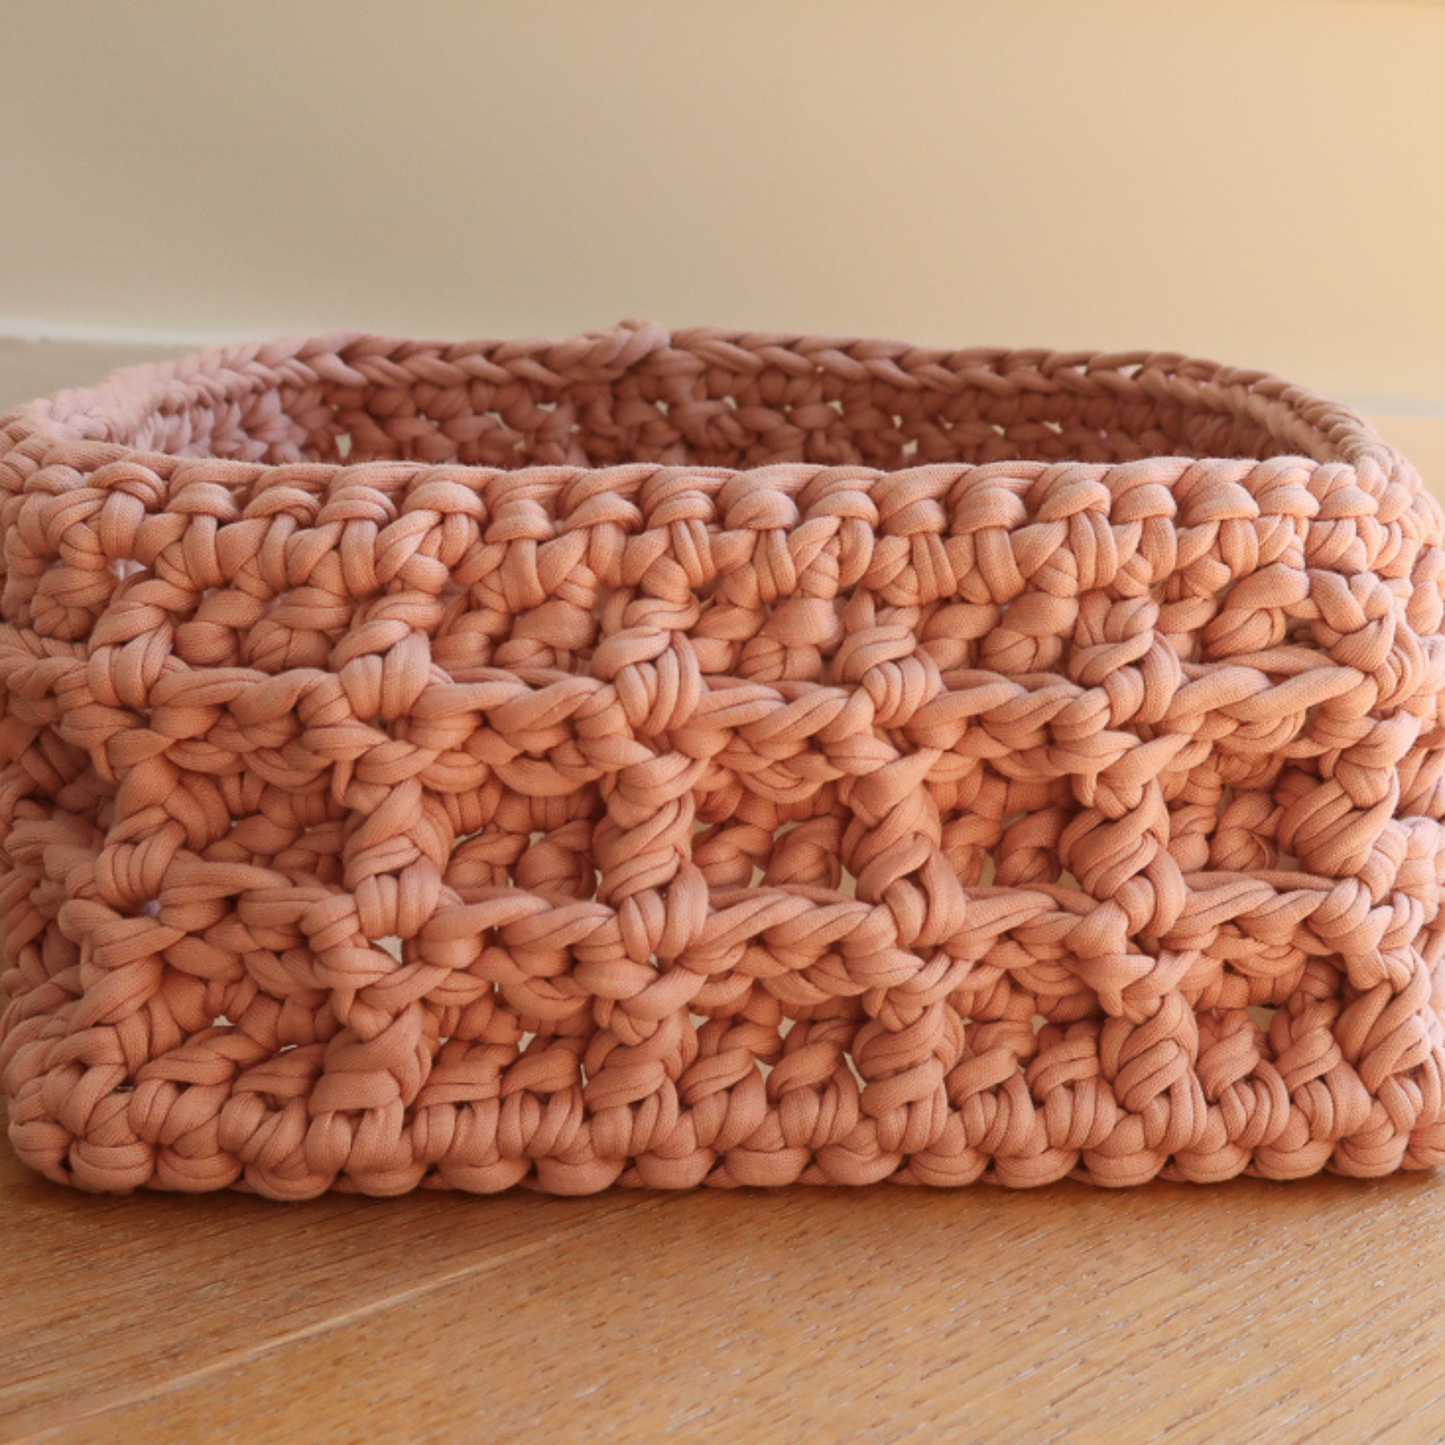 Crochet Square Basket Kit with wooden base